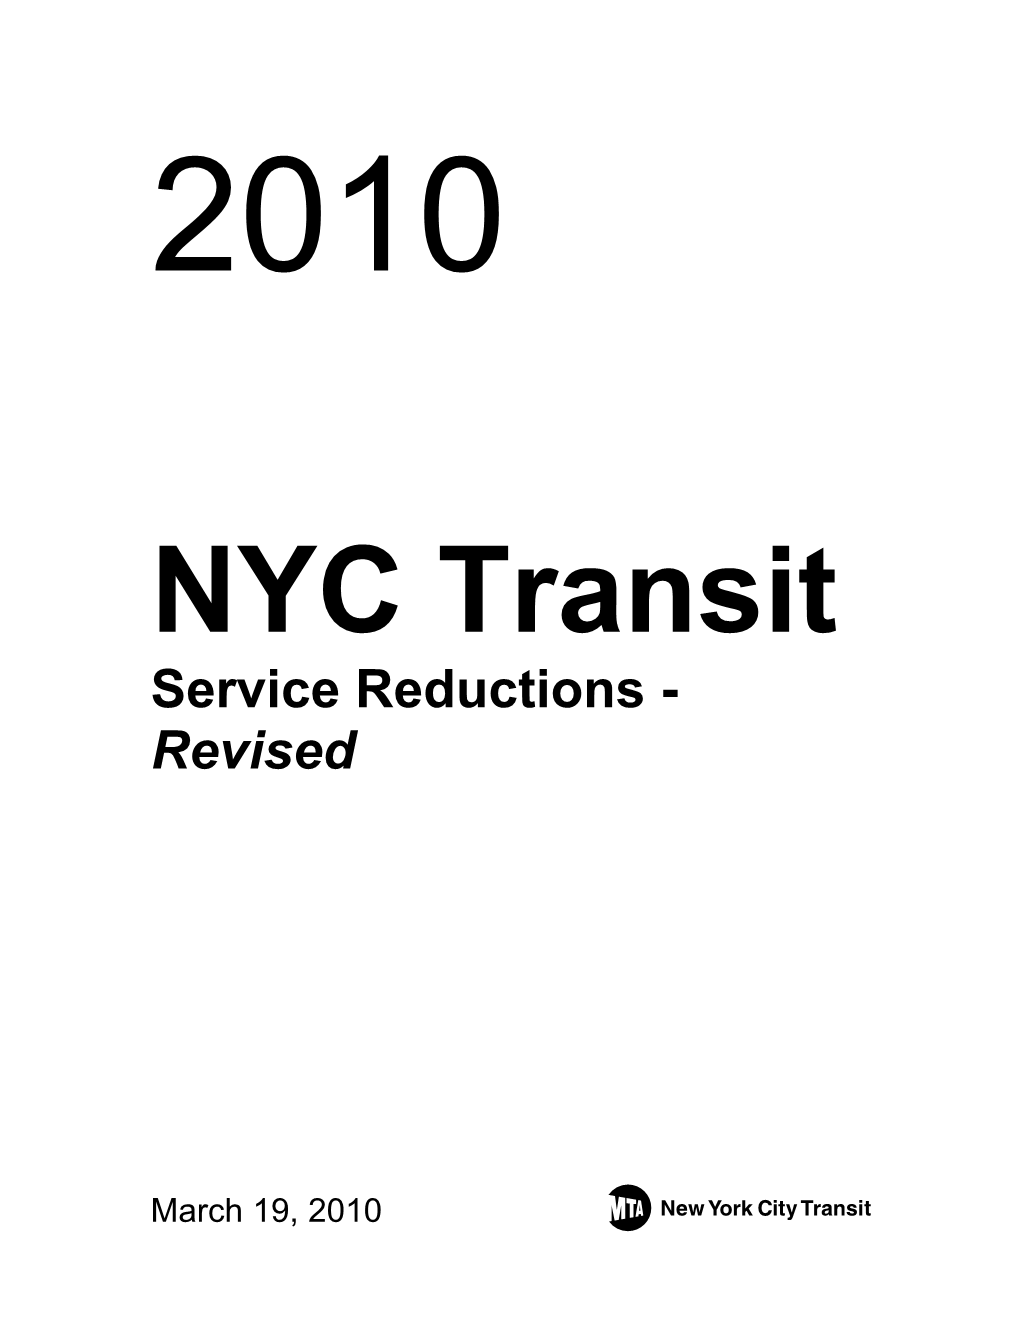 NYC Transit Service Reductions -Revised